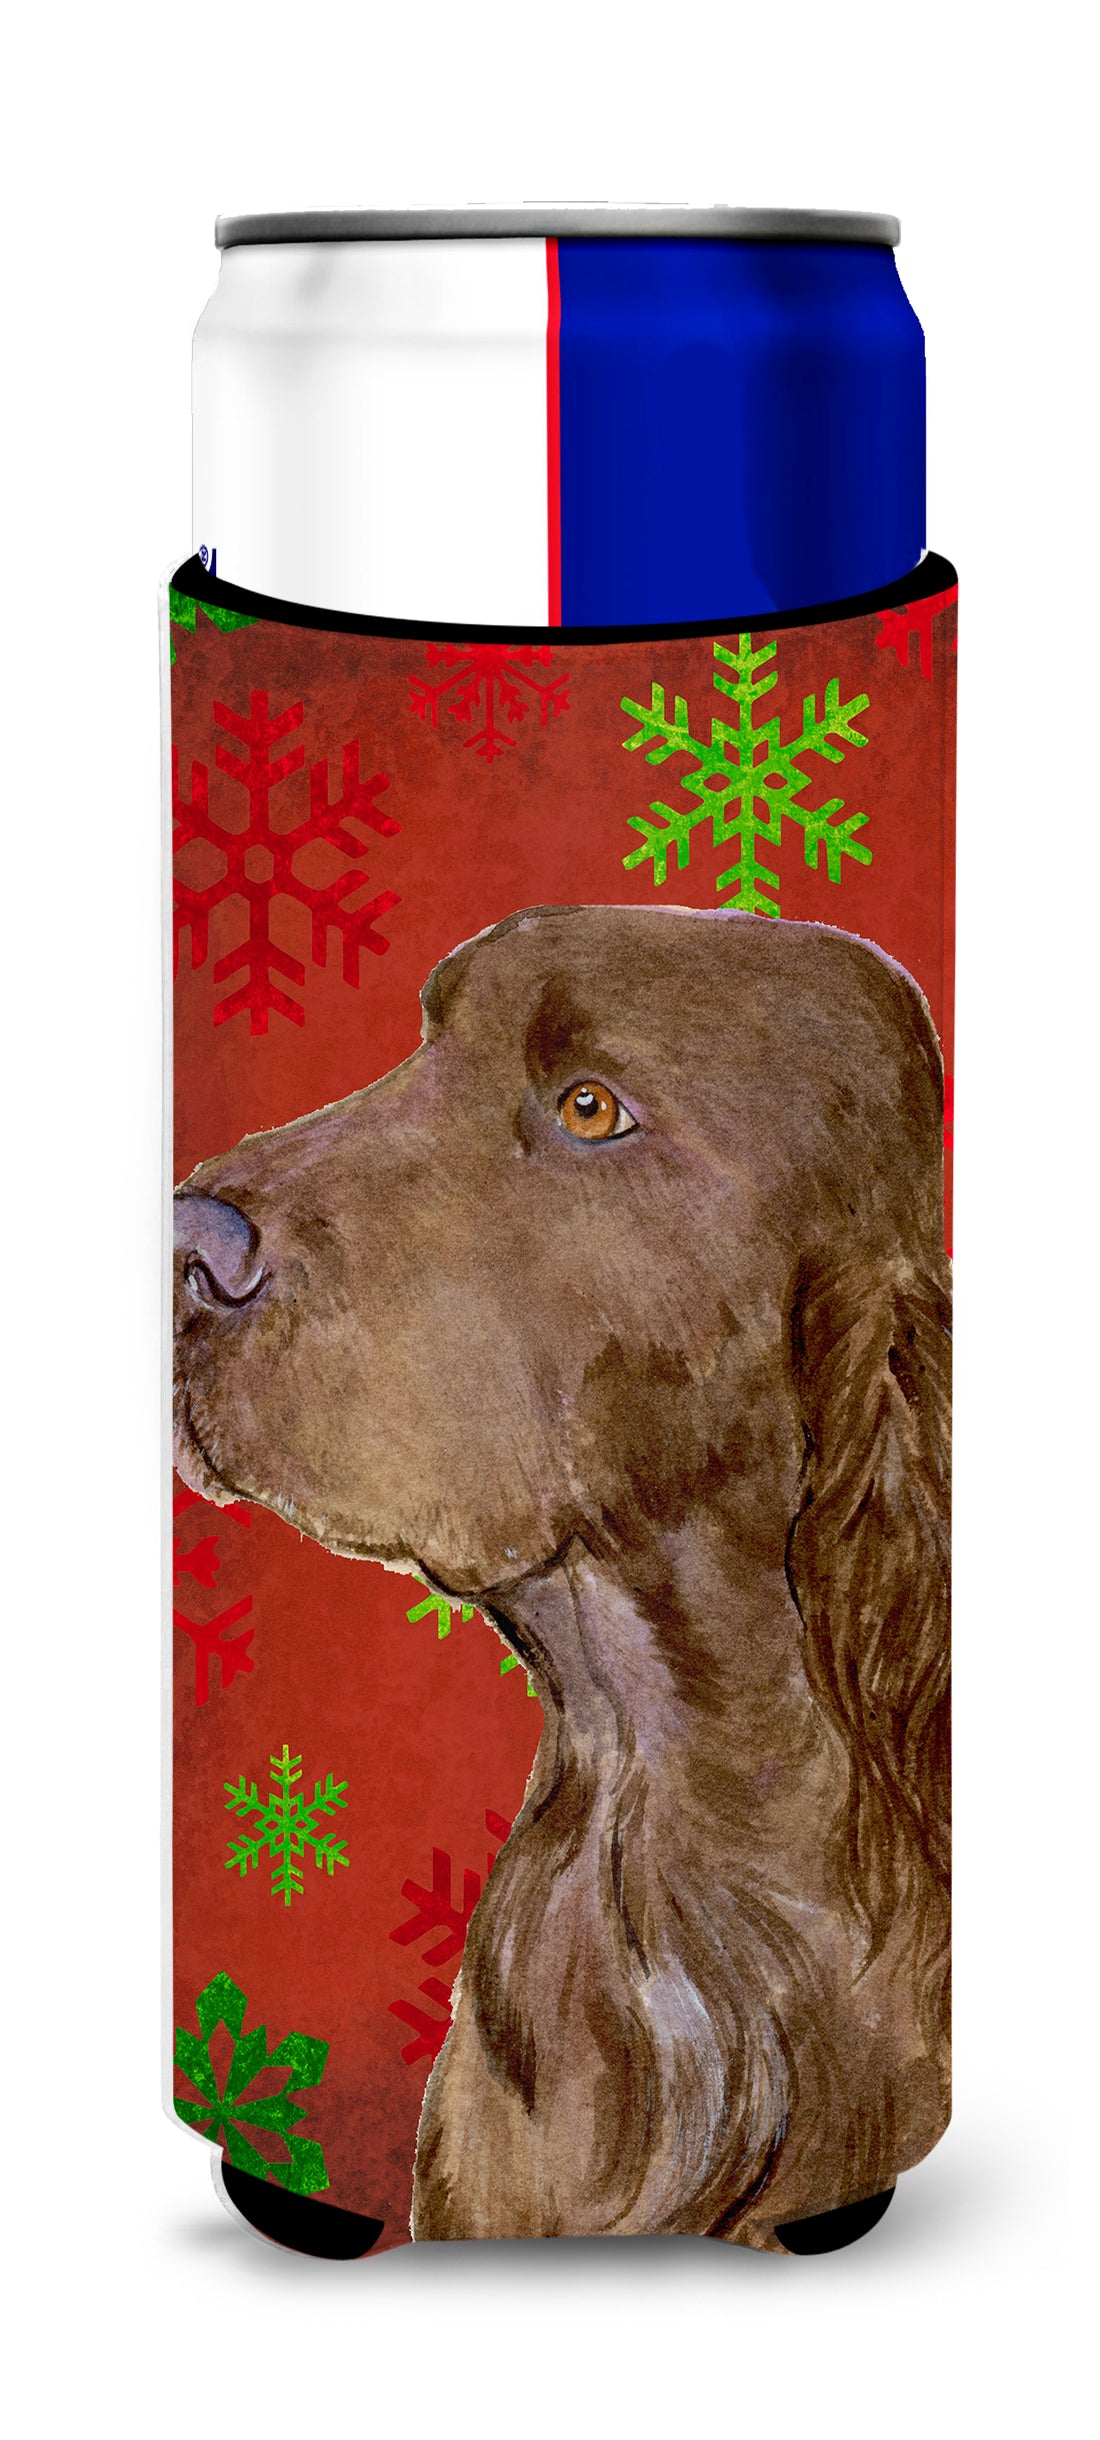 Field Spaniel Red and Green Snowflakes Holiday Christmas Ultra Beverage Insulators for slim cans SS4732MUK